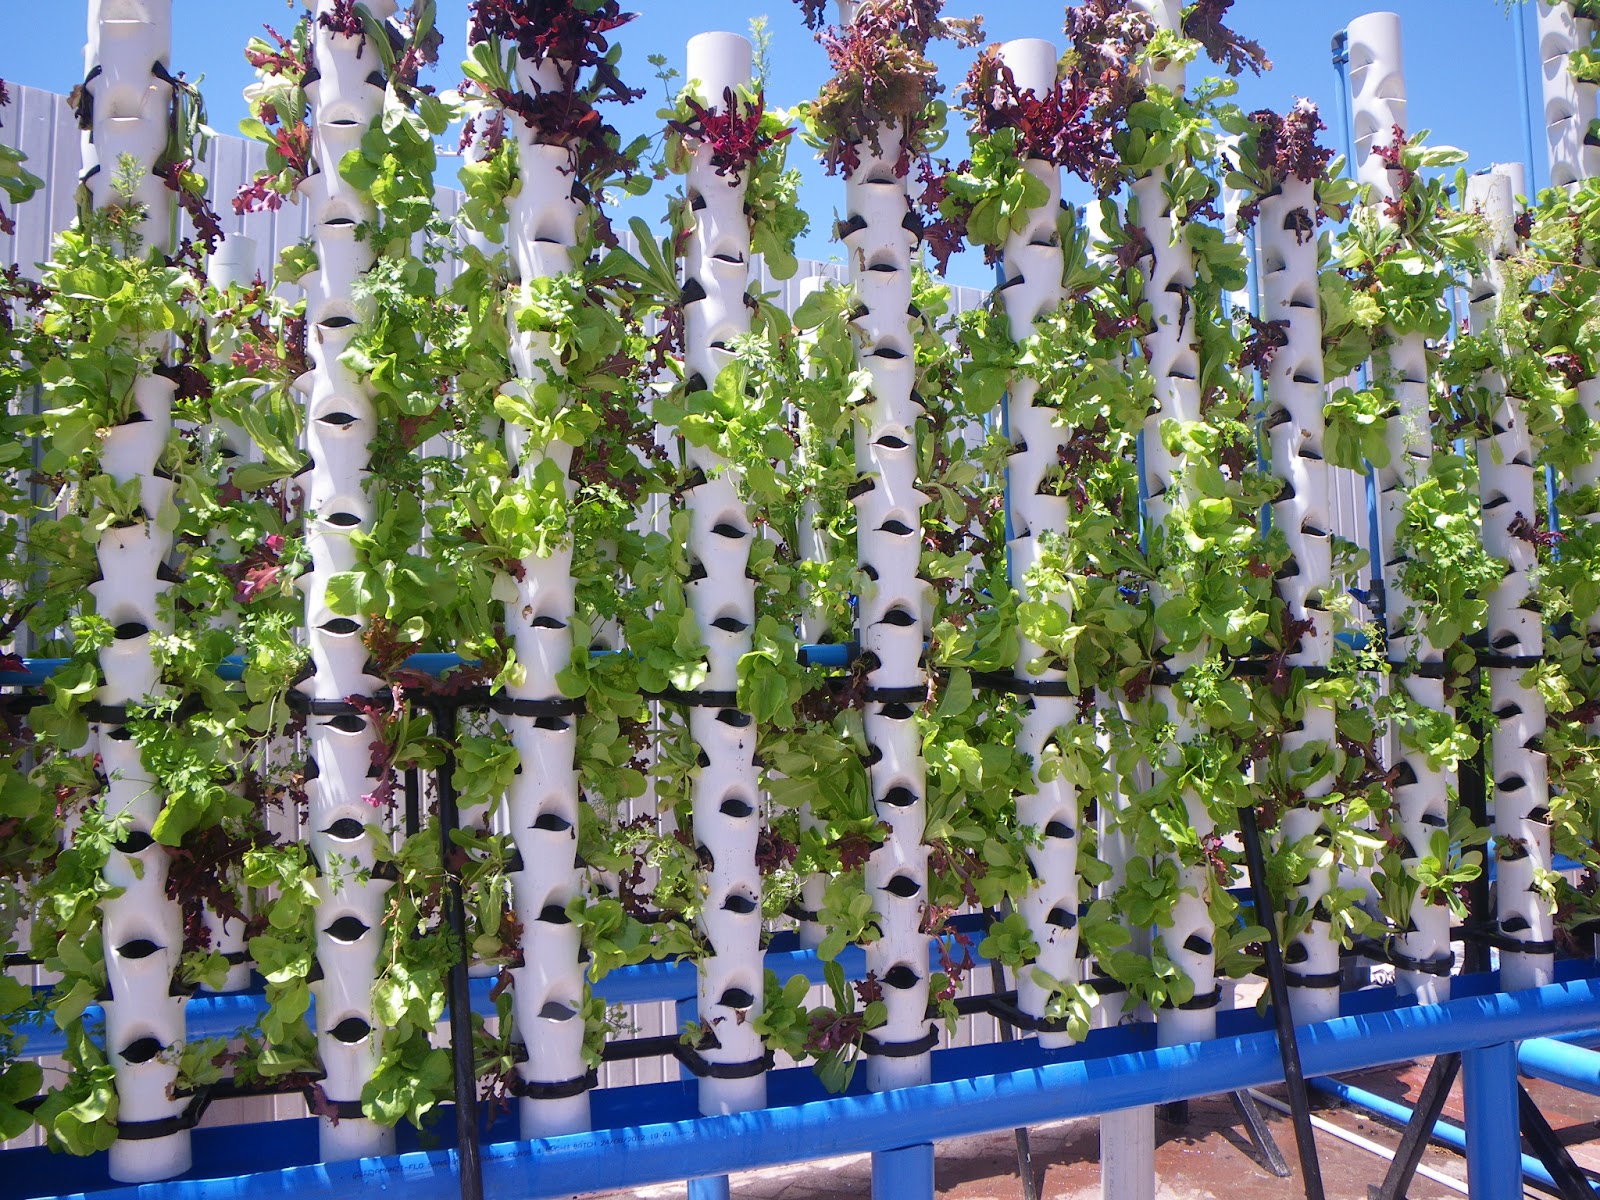 Urban garden "Aquaponic vertical farming system". Right outside a ...